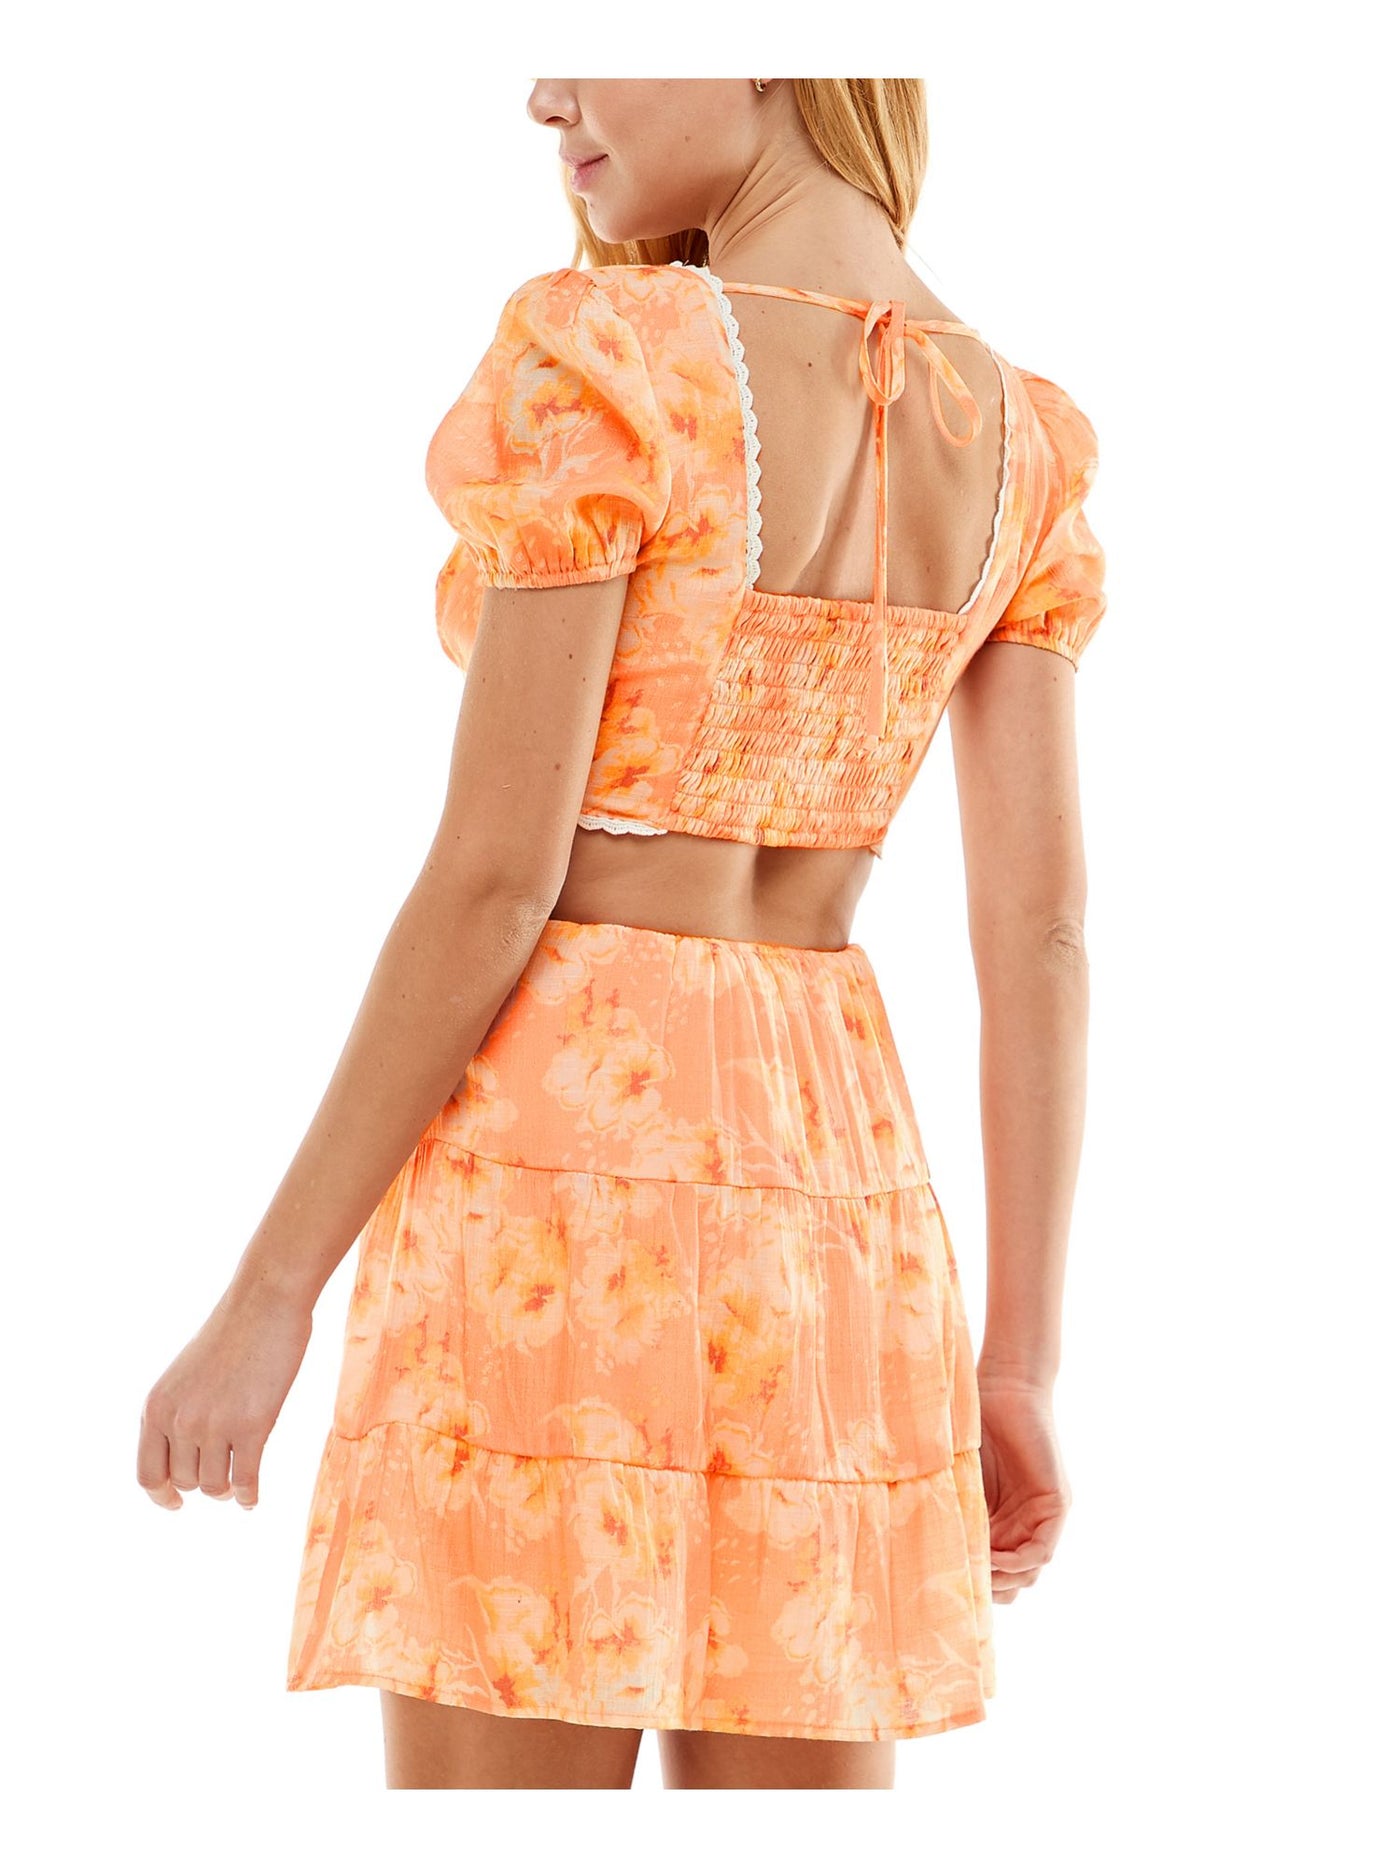 CITY STUDIO Womens Orange Smocked Cut Out Tie Back Lace Trim Tiered Skirt Printed Short Sleeve V Neck Mini Party Fit + Flare Dress Juniors XXL